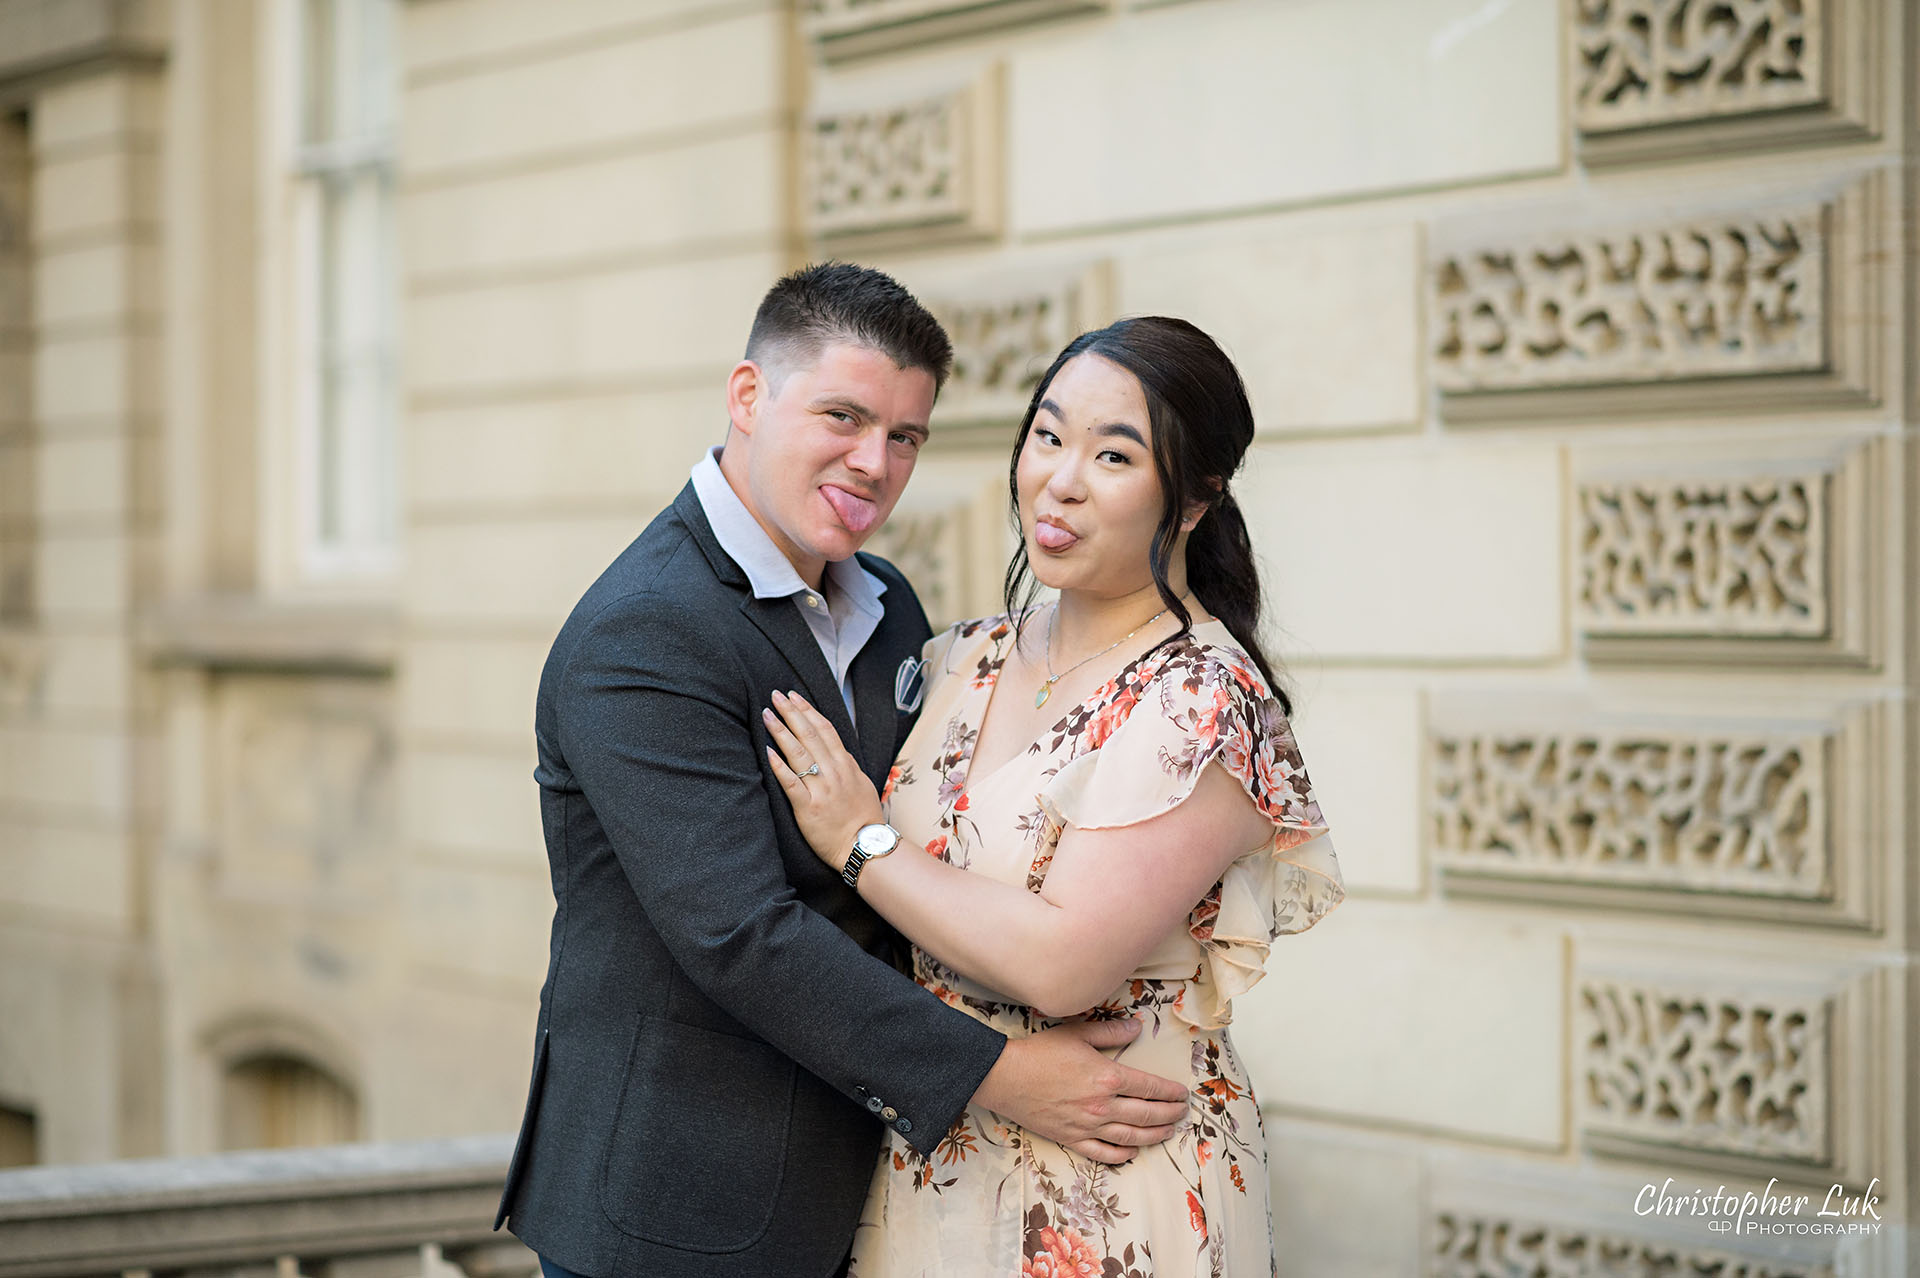 Christopher Luk Toronto Wedding Photographer Engagement Photos Pictures Session Osgoode Hall Nathan Philips Square City Hall Bride Groom Natural Candid Photojournalistic Organic Sunset Funny Silly Faces Sticking Tongue Out Landscape